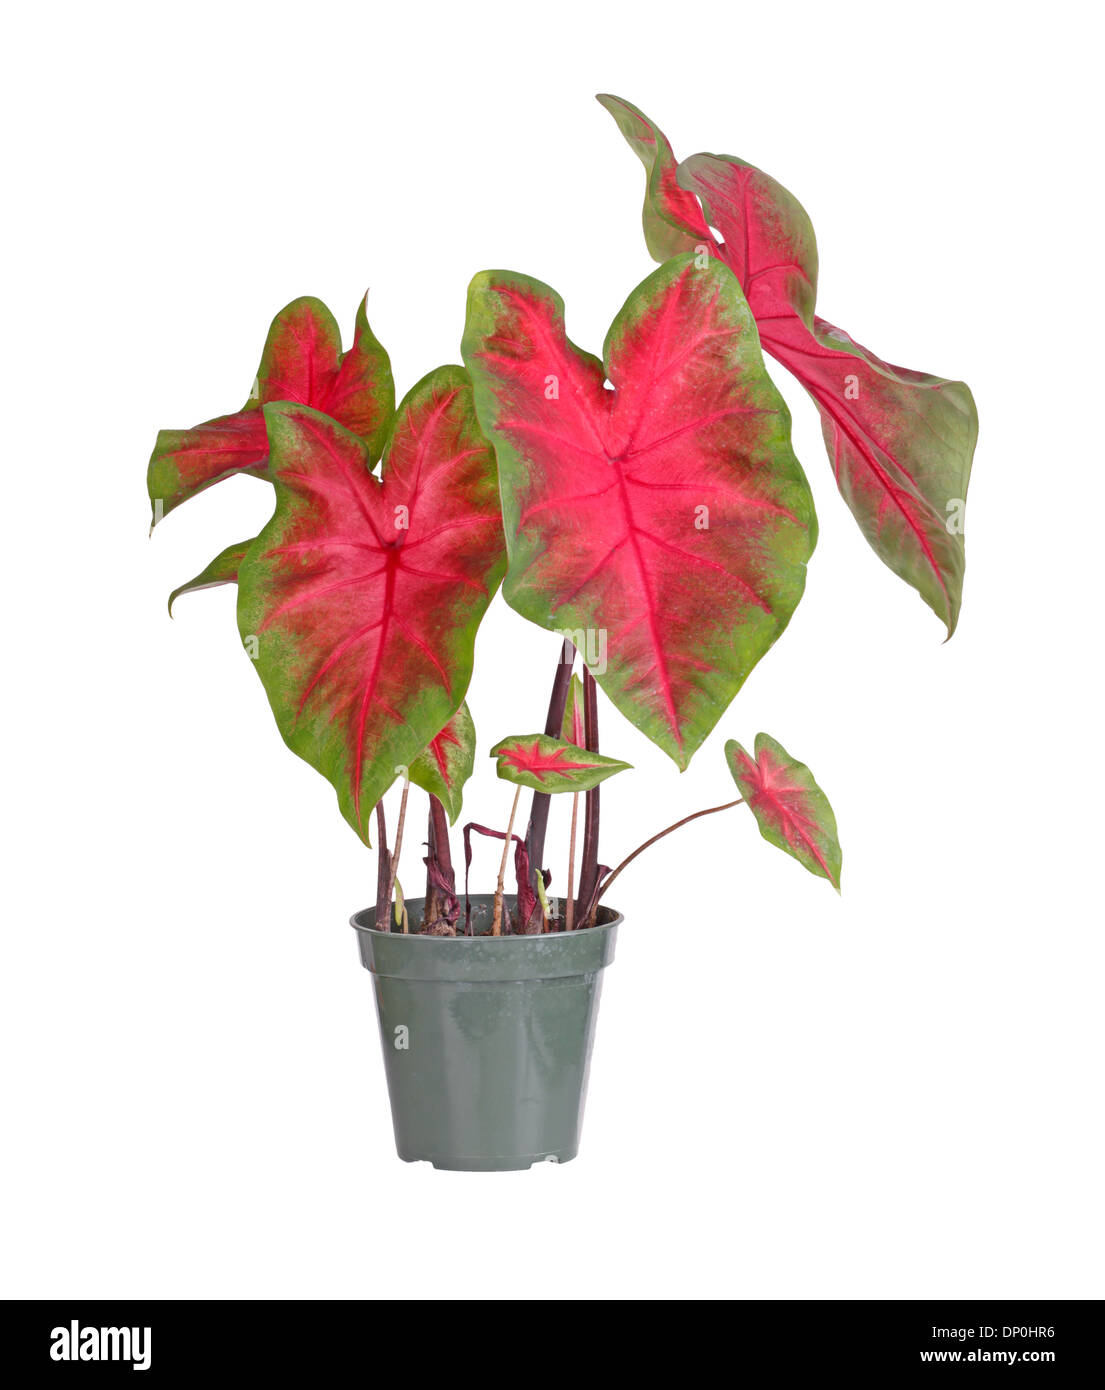 Plant of a red-and-green-leaved caladium (Caladium bicolor) in a small plastic pot ready for transplanting into a garden Stock Photo